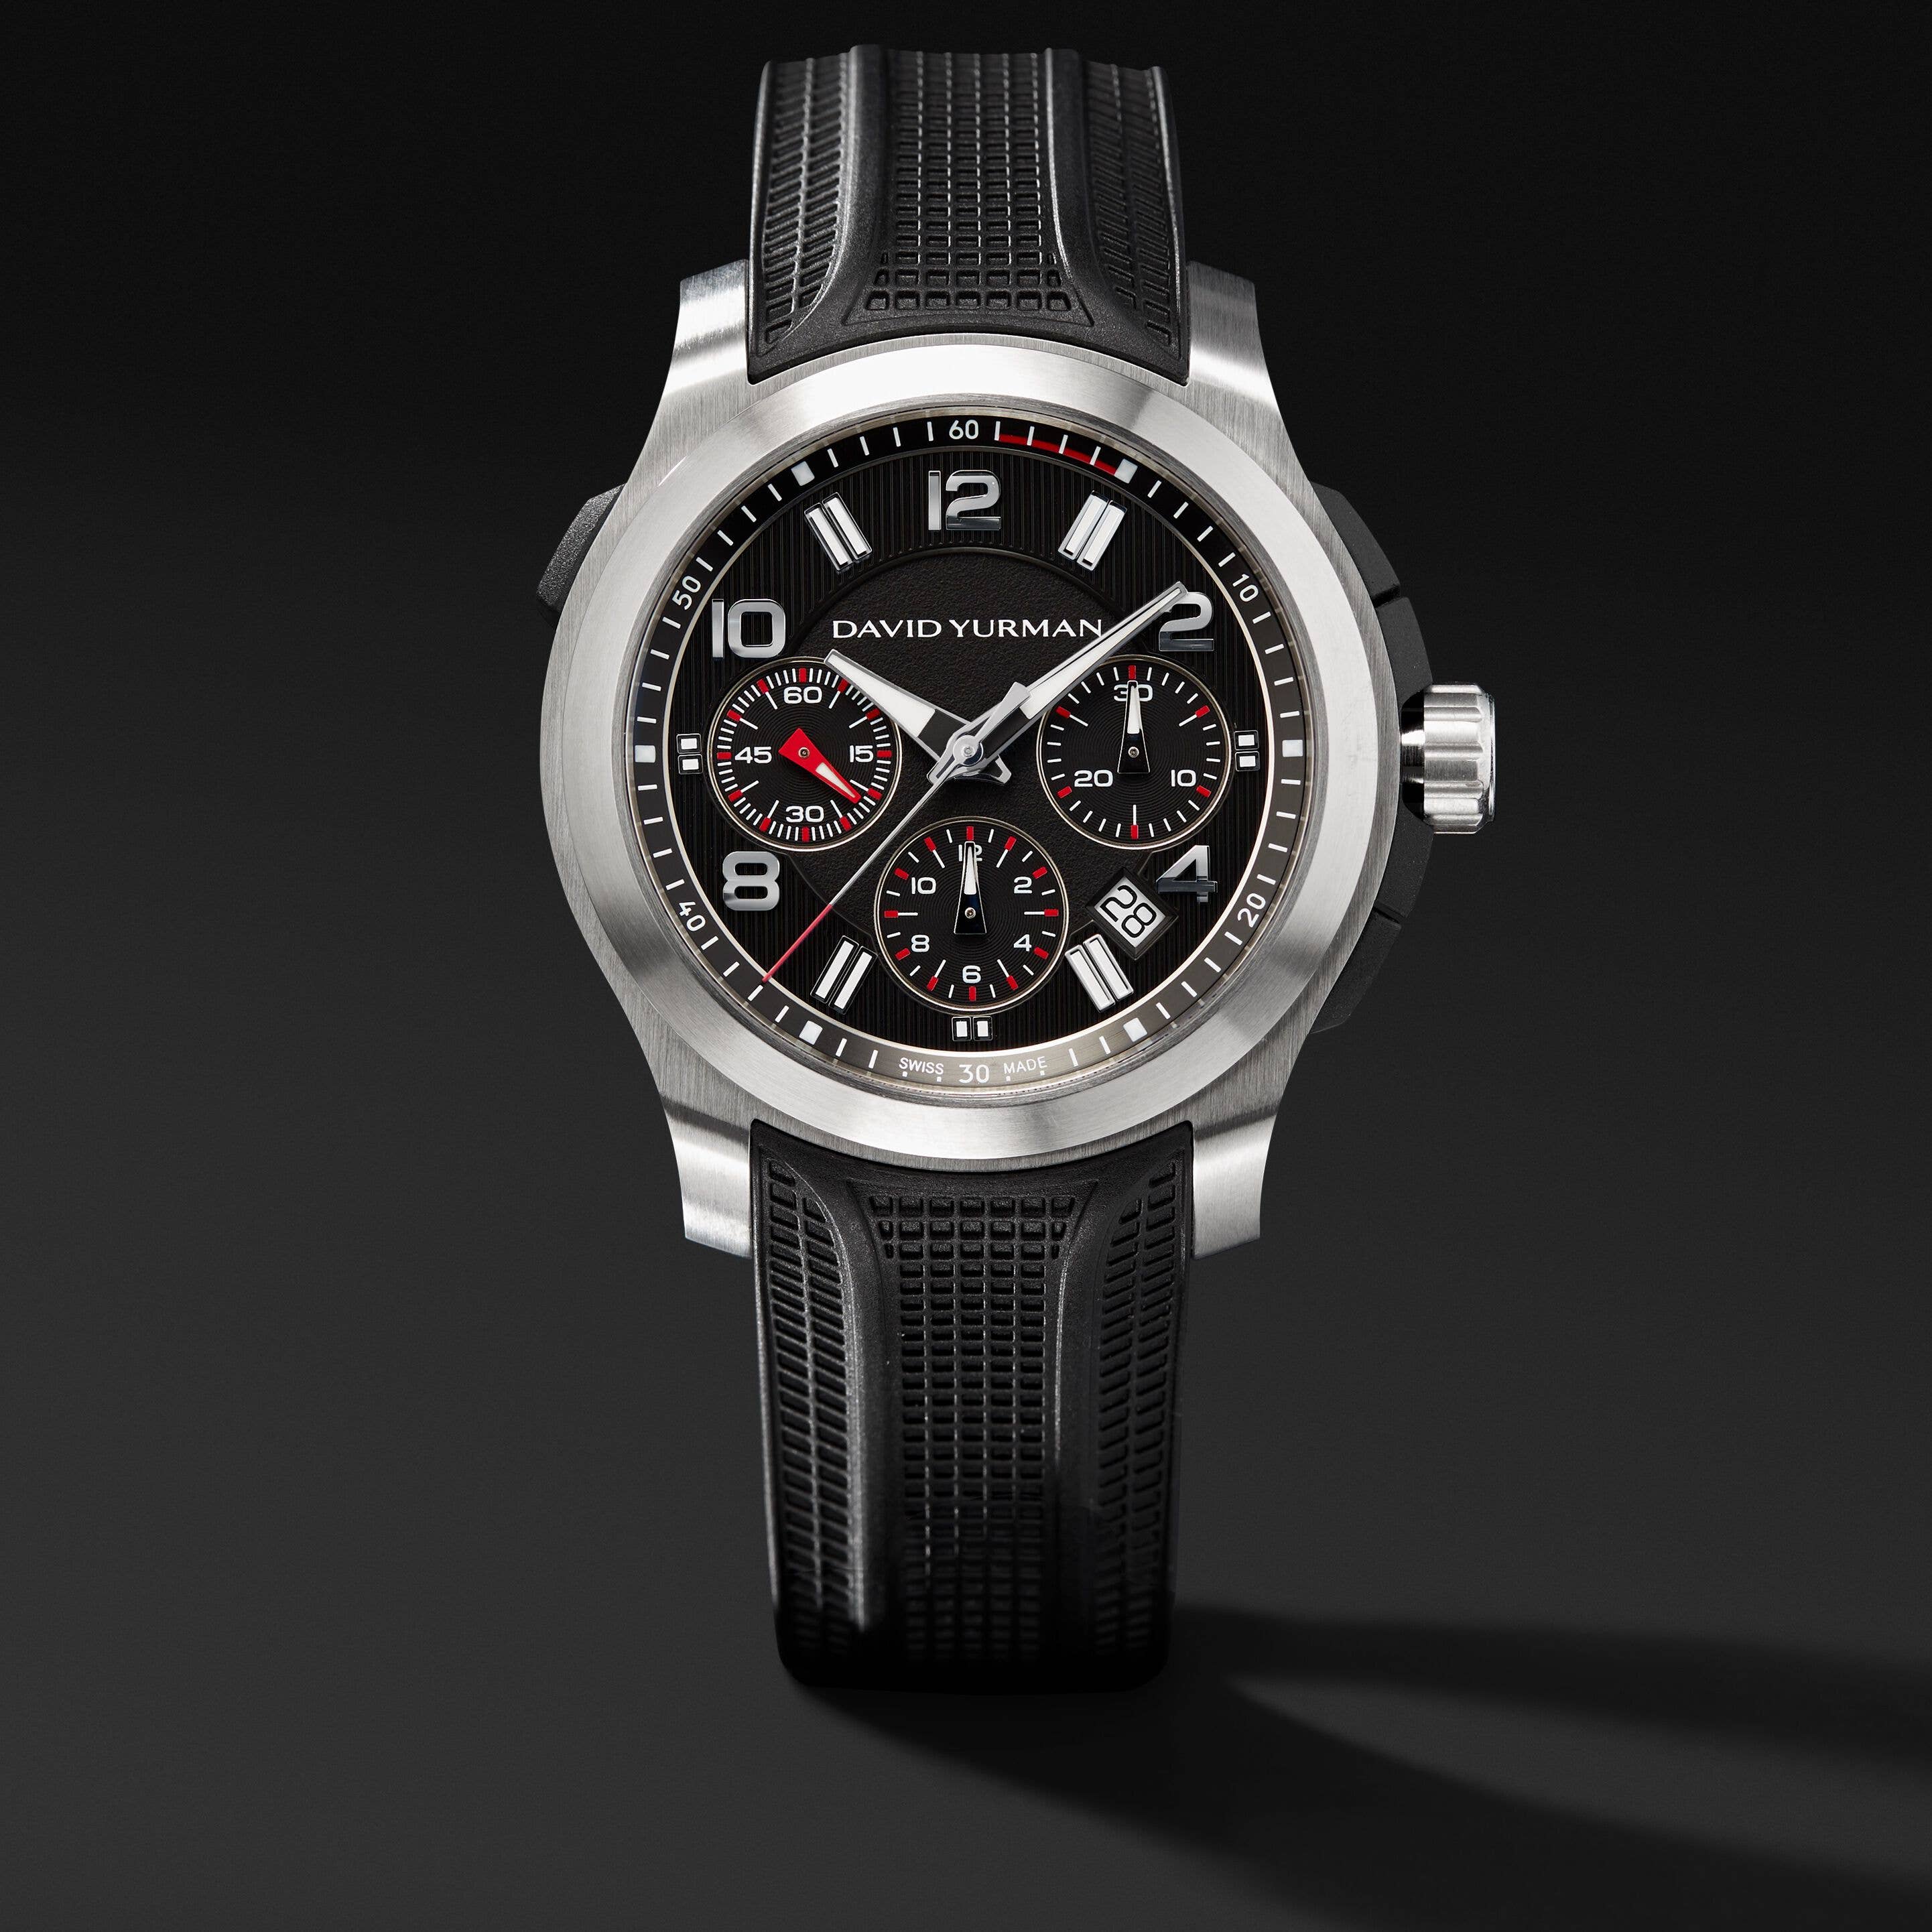 Revolution Stainless Steel Chronograph Watch with Black Rubber Strap